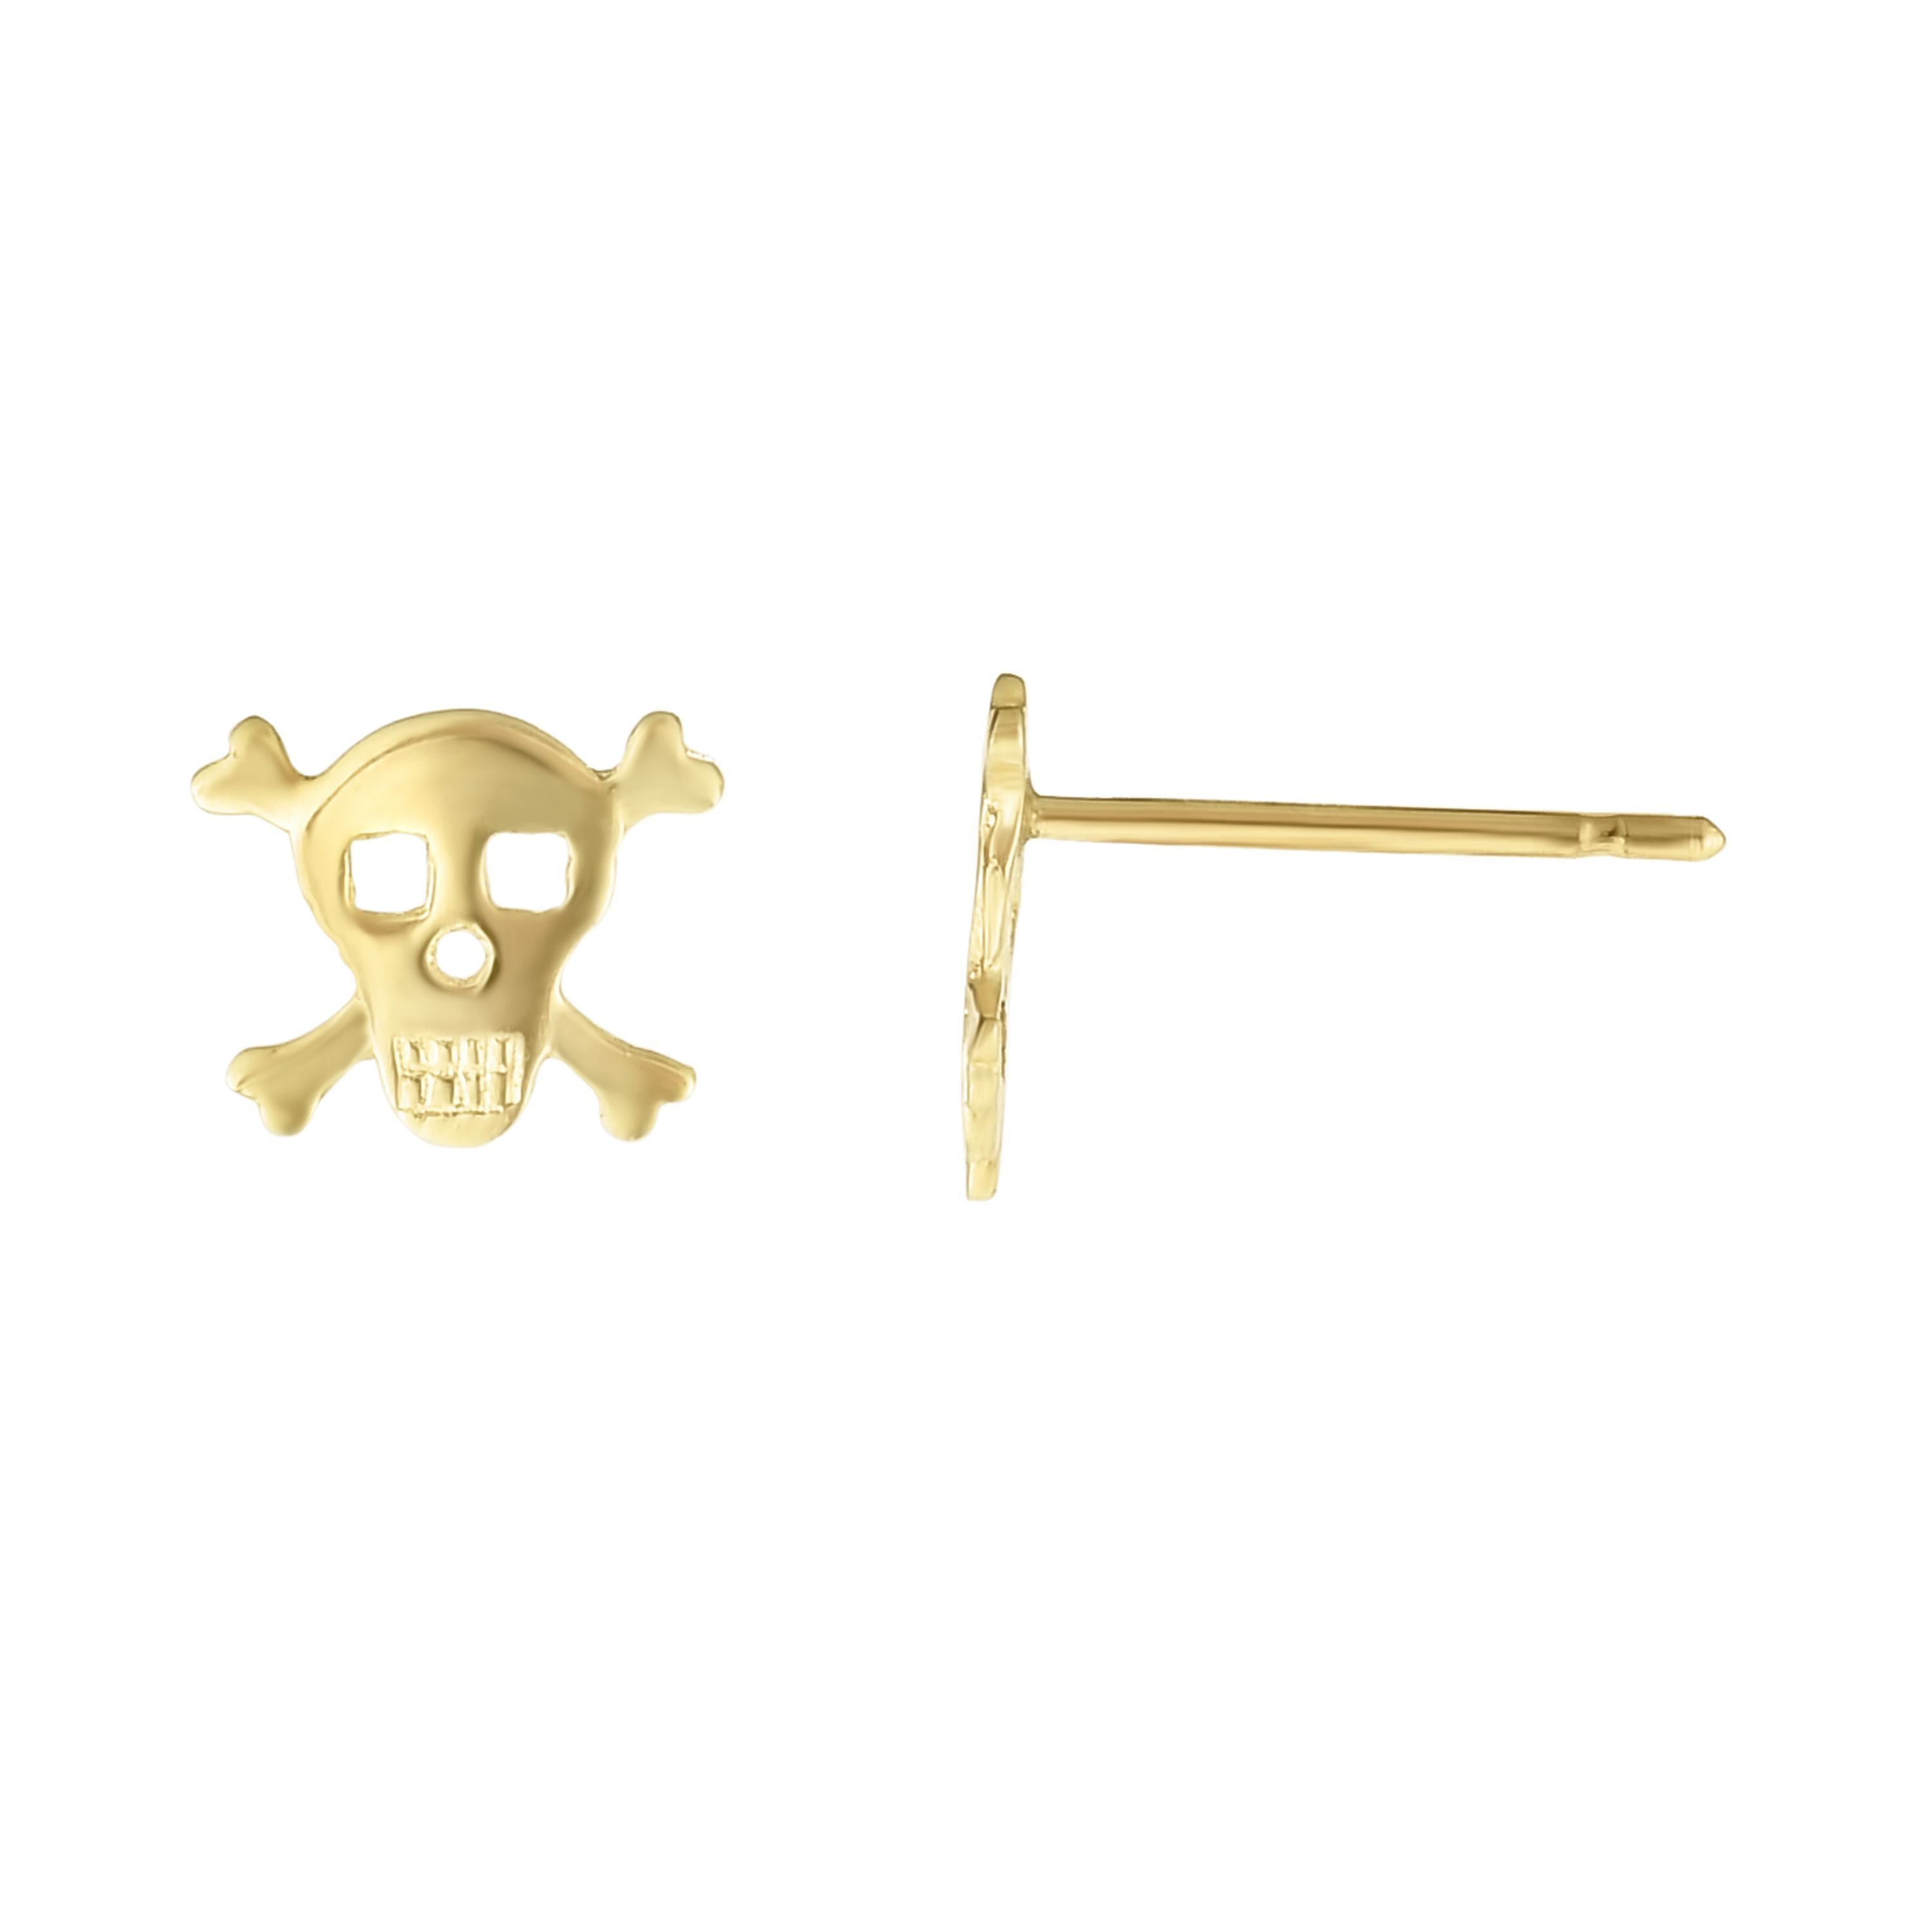 Minimalist Solid Gold Diamond Cut Skull Earrings with Push Back Clasp with 14k Solid Gold - wingroupjewelry